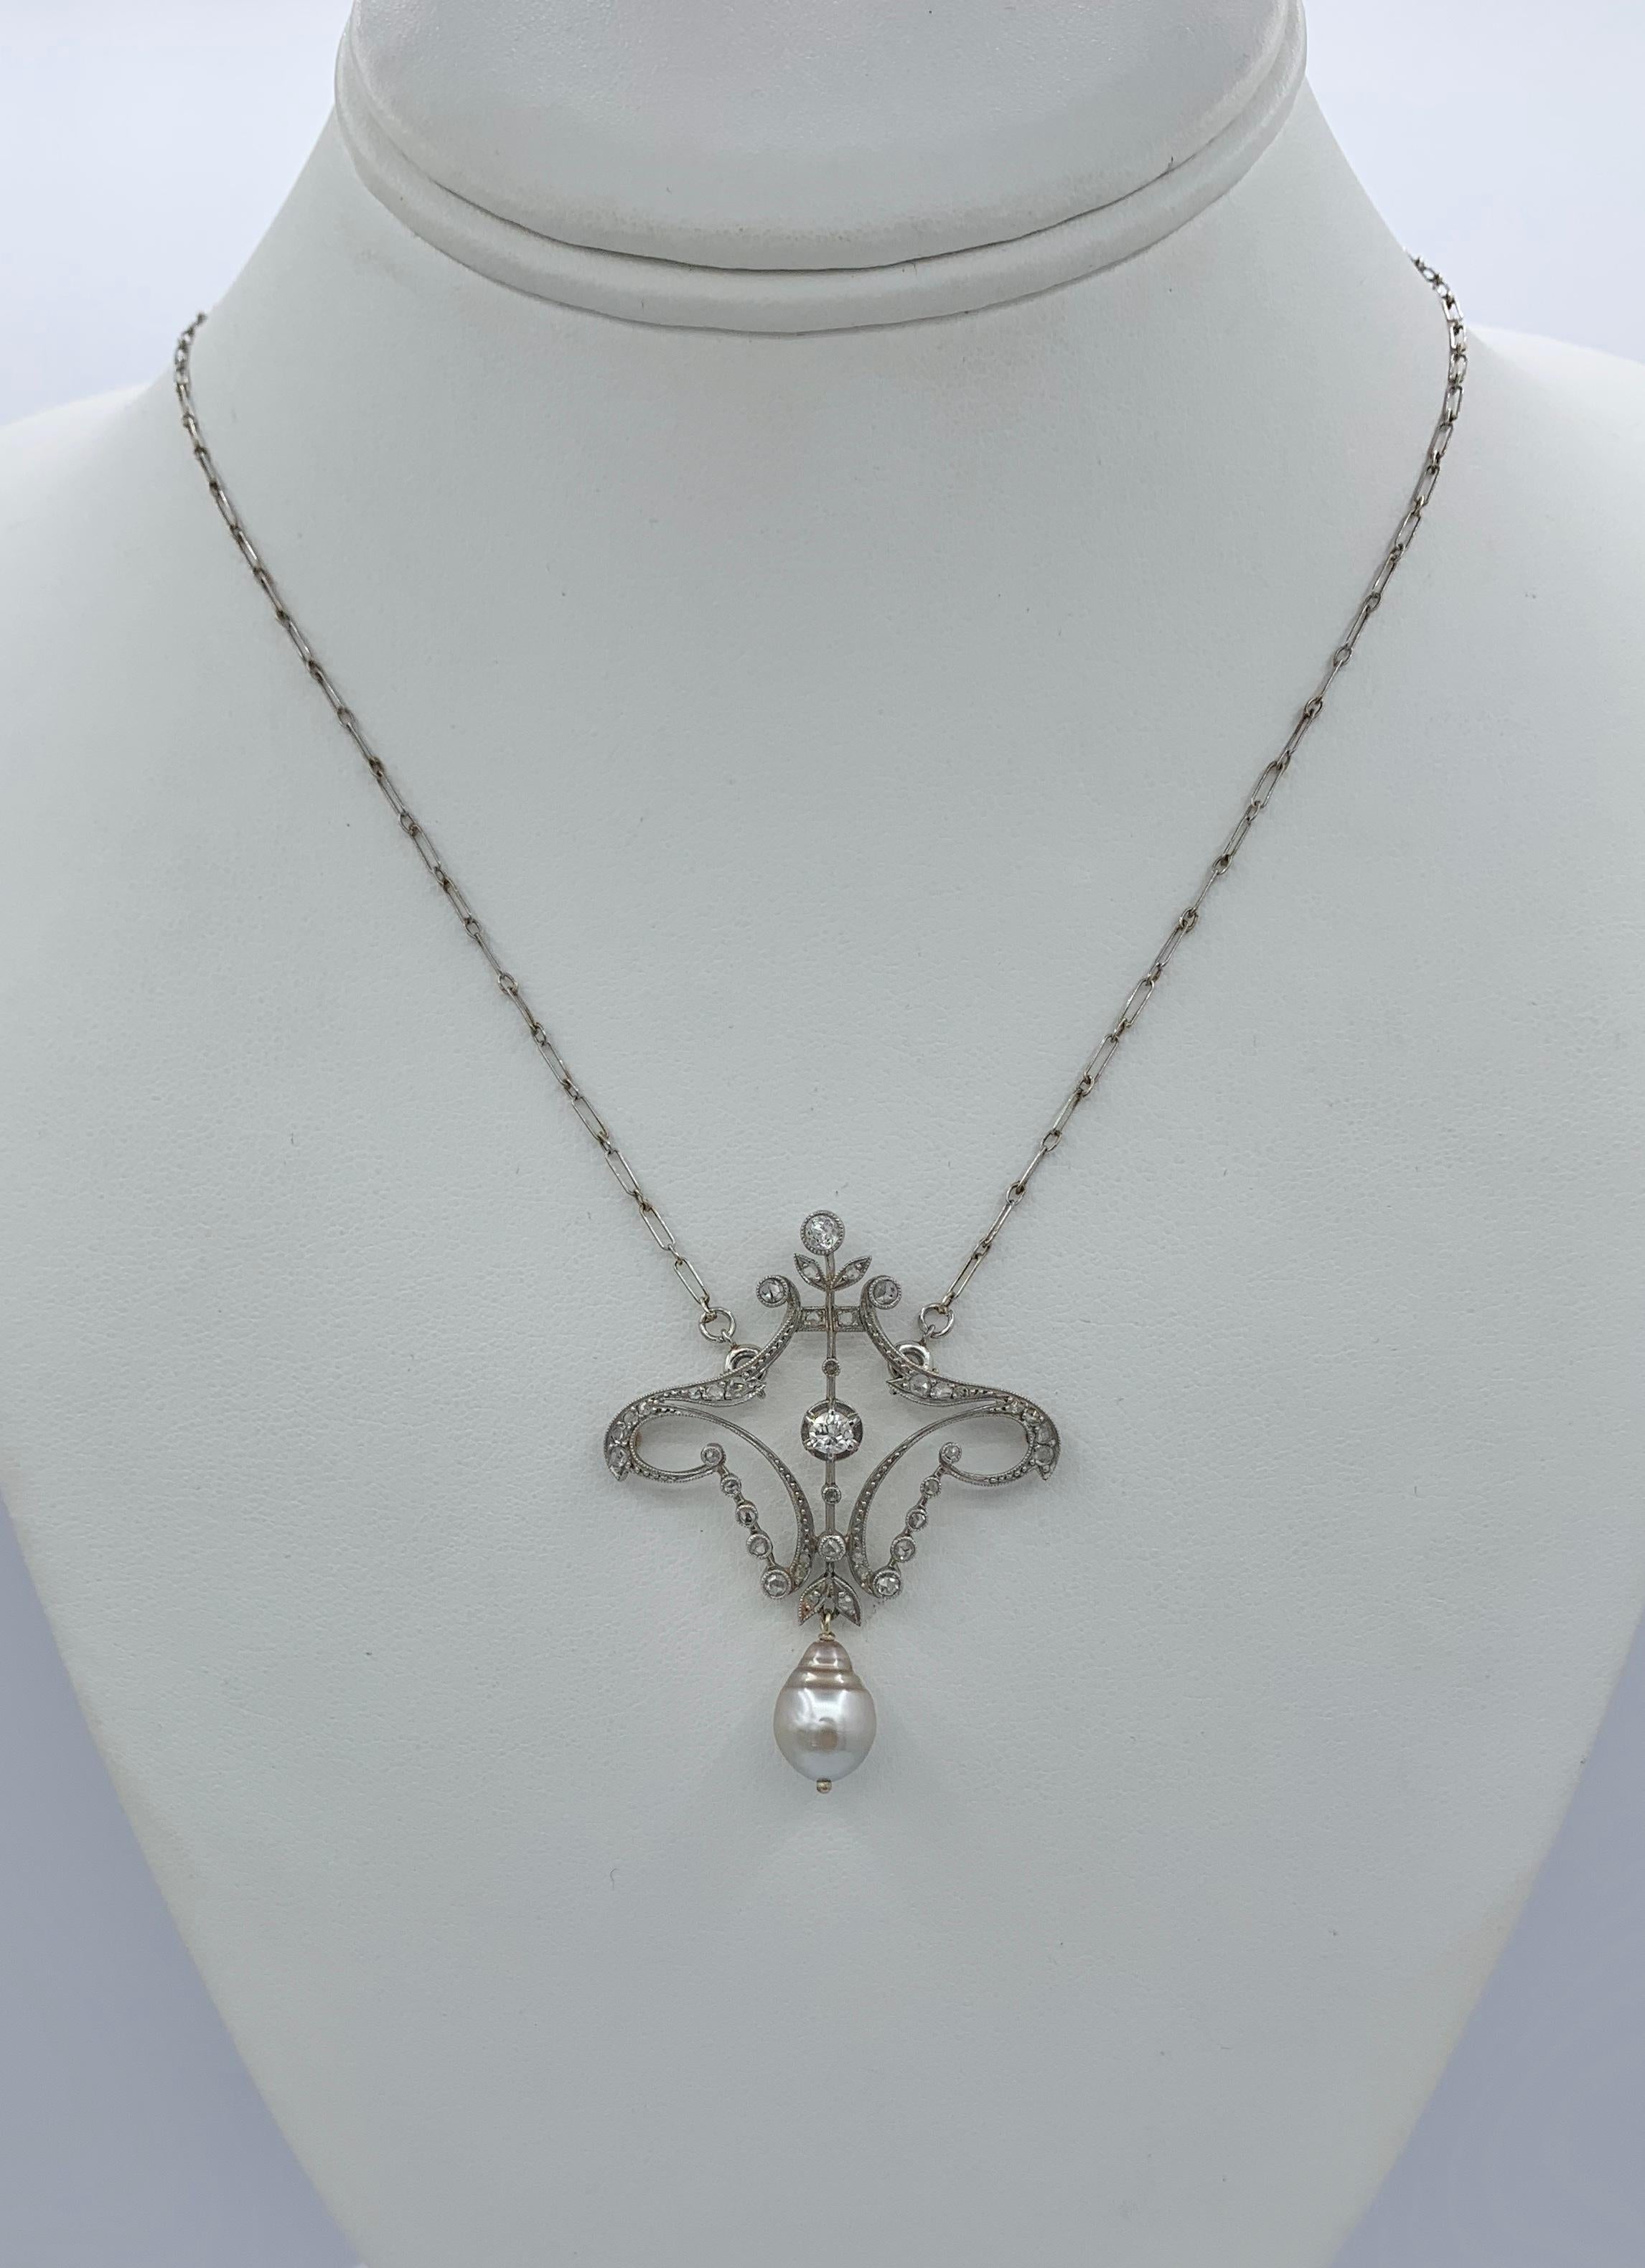 This is a spectacular Antique Victorian - Edwardian Garland Motif Pendant Necklace set with Old European and Rose Cut Diamonds in an extraordinary open work scroll motif setting in Platinum with a Pearl drop and Platinum paper clip chain.
The